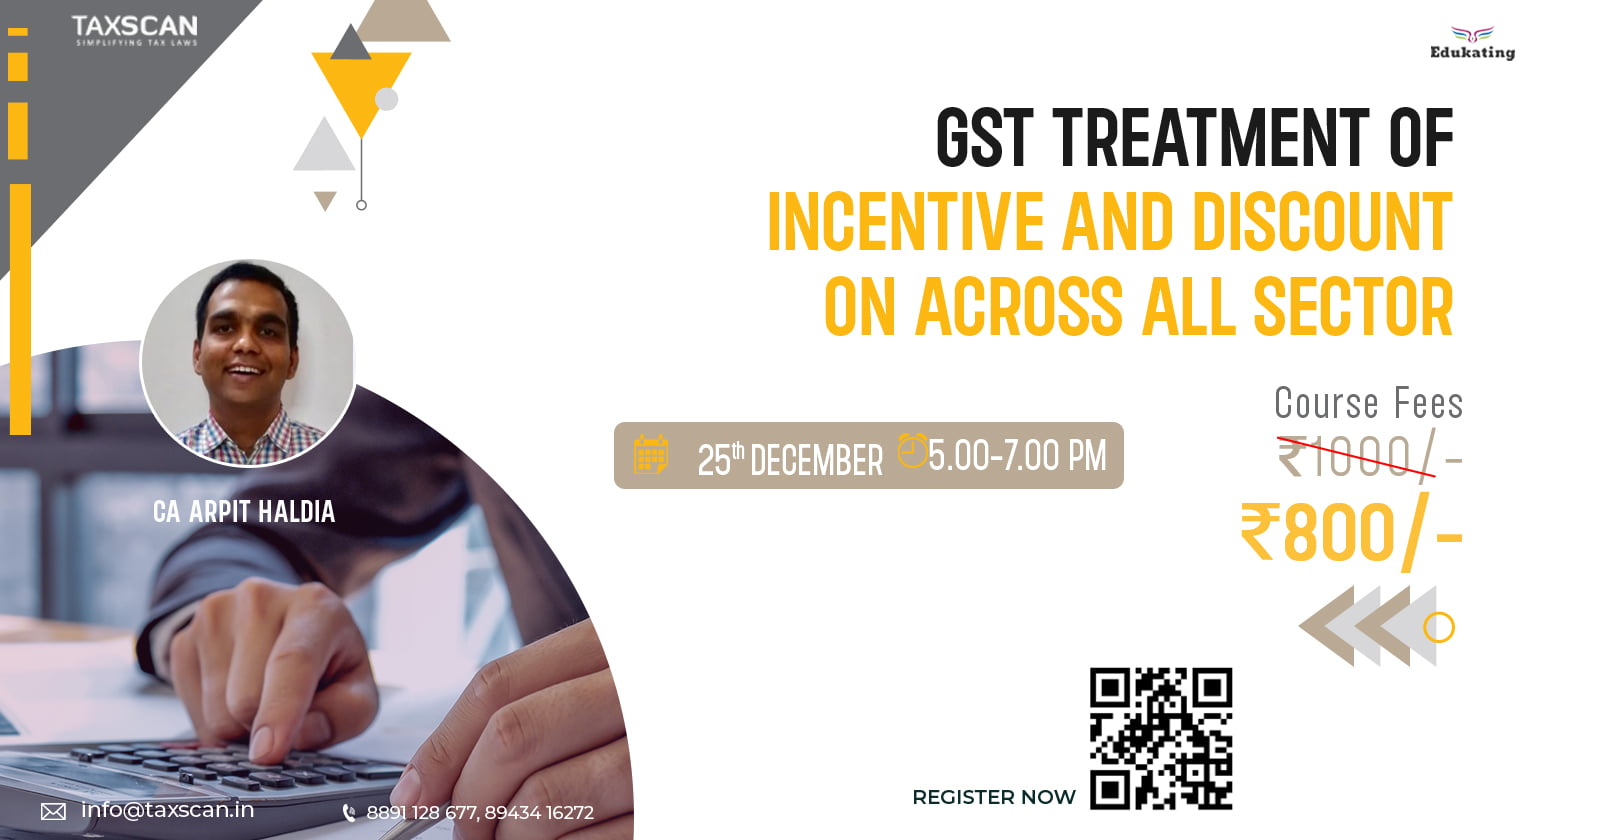 GST TREATMENT - INCENTIVE AND DISCOUNT - INCENTIVE - DISCOUNT - Certificate Course - online Certificate Course - GST Course - Certificate Course2022 - Taxscan Academy